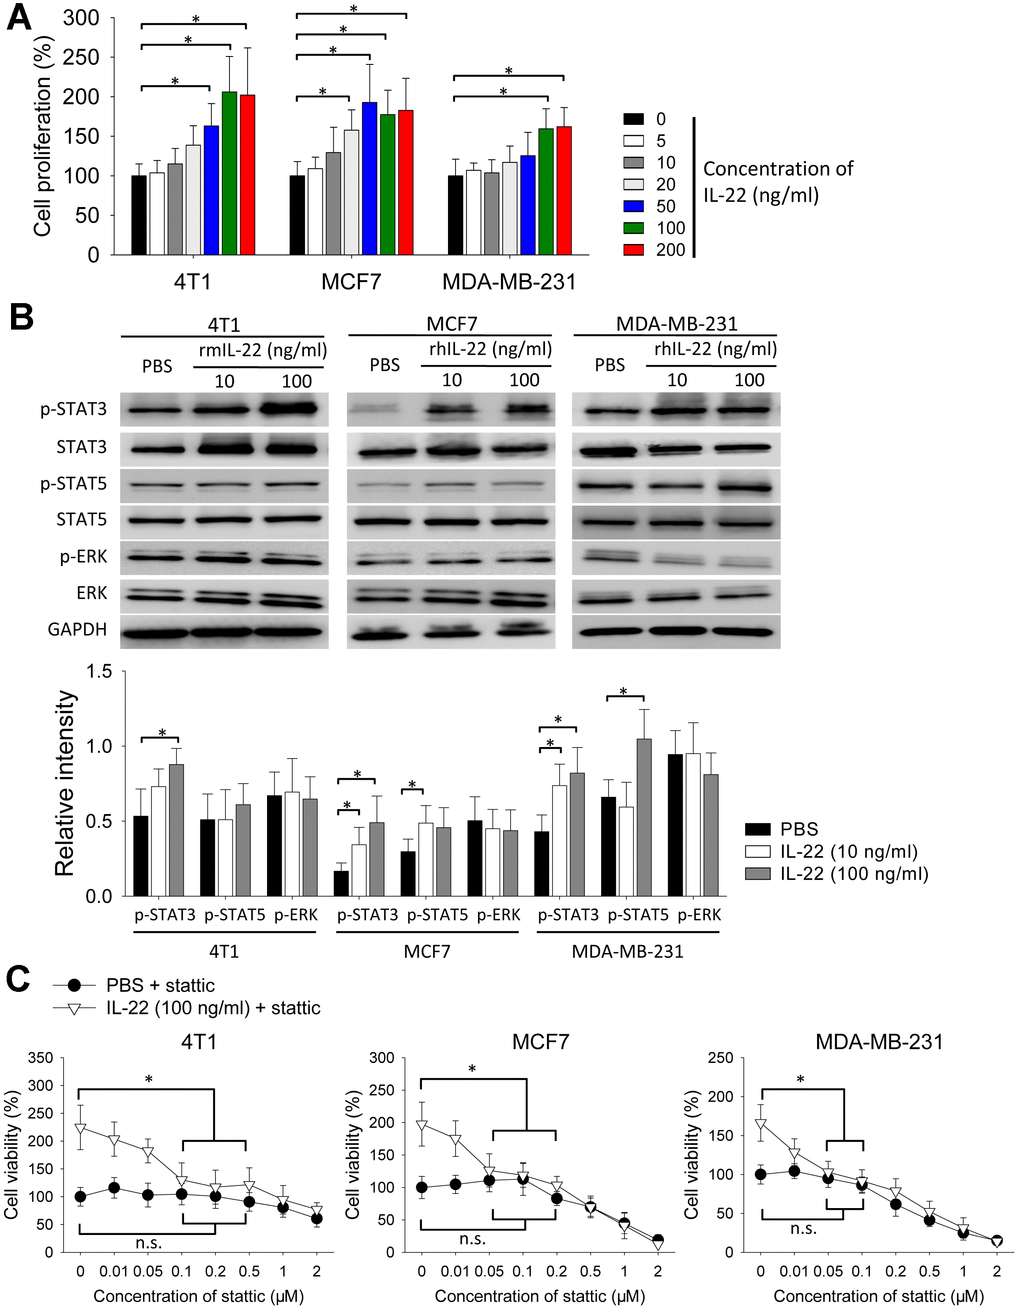 IL-22 stimulates proliferation of breast cancer cells in vitro. (A, B) 4T1, MCF7 and MDA-MB-231 cells were cultured with different doses of rhIL-22 or rmIL-22 for 24 h. Cells cultured without IL-22 were used as control. (A) Cell proliferation was measured with CCK-8 assay (n=6). *, p B) Western blot was applied to analyze levels of indicated proteins. Experiment was repeated twice. Intensities of phospho-proteins were analyzed using ImageJ software, and were normalized to relative total proteins. *, p C) 4T1, MCF7 and MDA-MB-231 cells were cultured with IL-22 (100 ng/ml) in the presence of different doses of stattic for 24 h. Cells cultured without stattic were used as control. Cell proliferation was measured with CCK-8 assay (n=6). *, p t test or one-way ANOVA test.